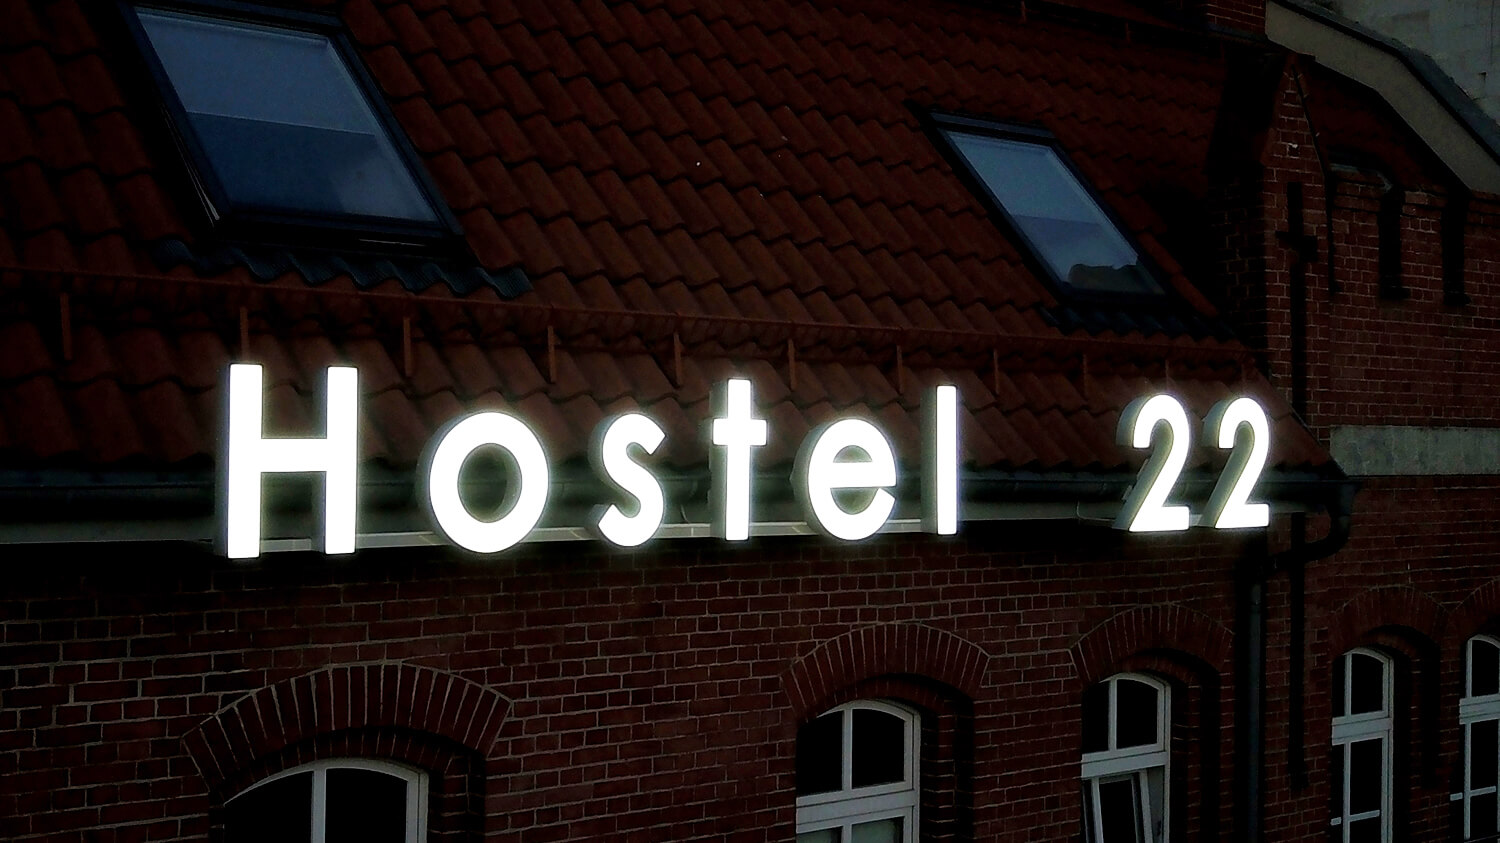 Hostel 22 - Hostel 22 - light spatial letters placed on the wall